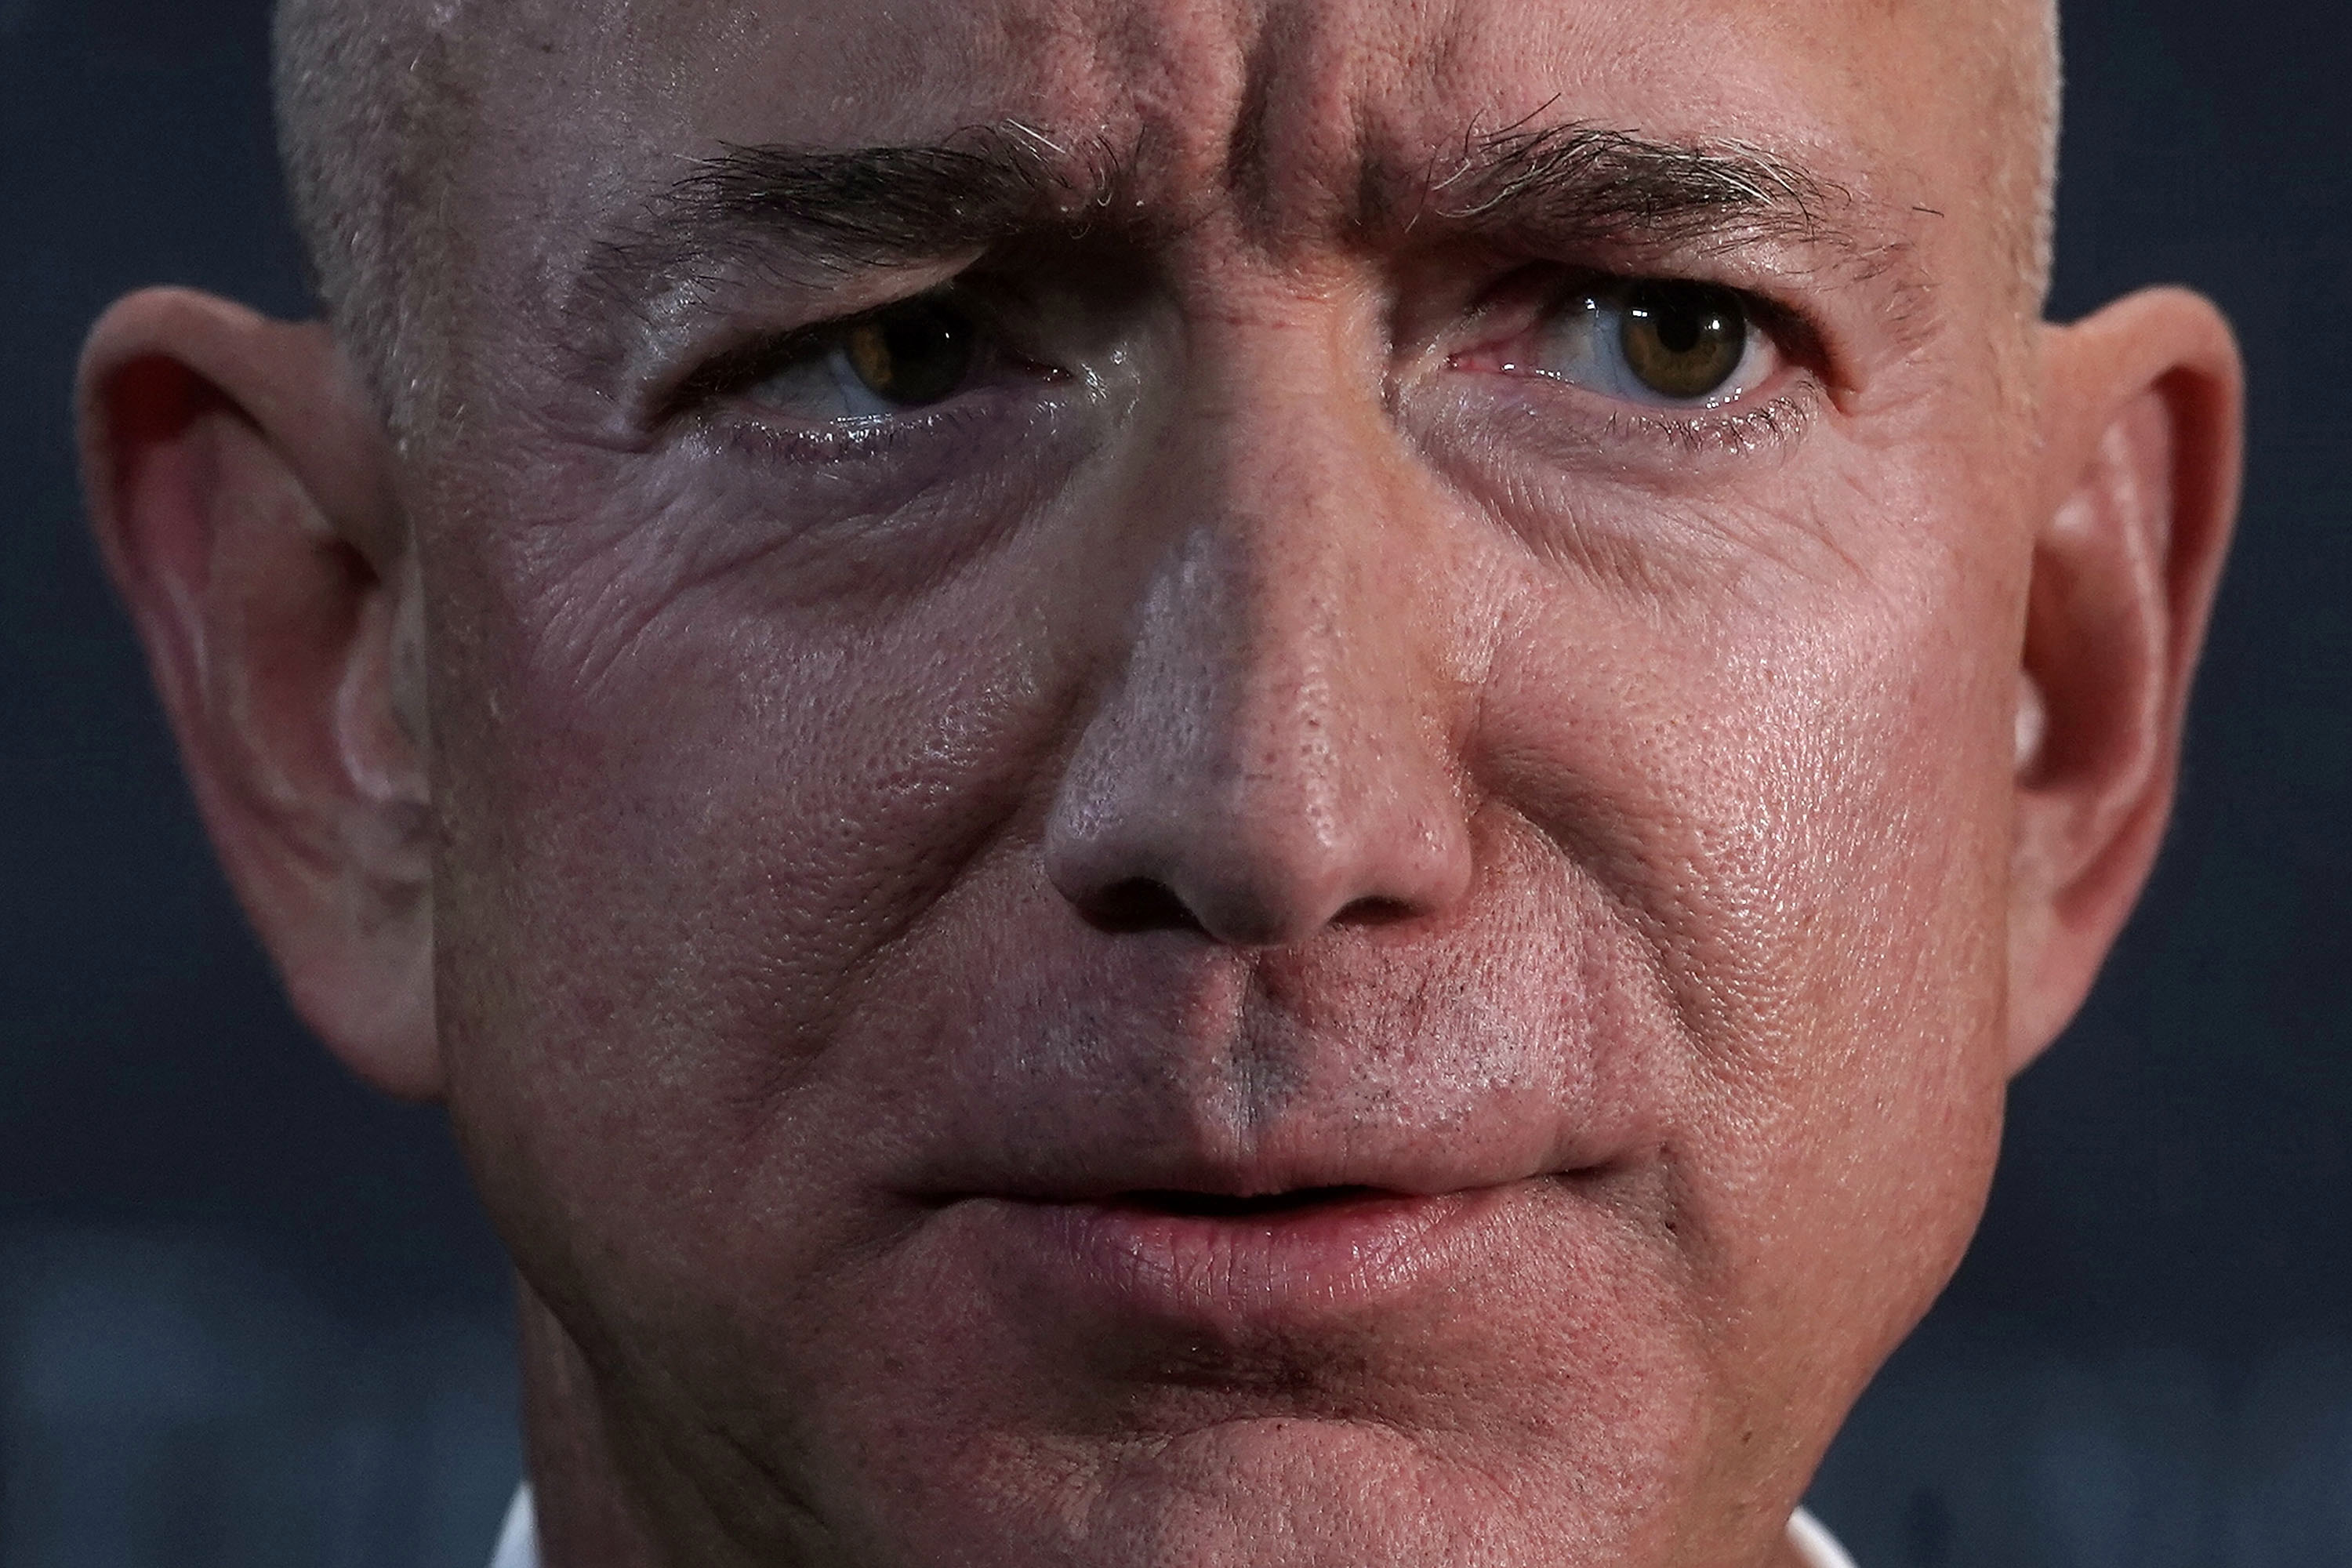 Jeff Bezos Just Lost His Status as the World's Richest Man